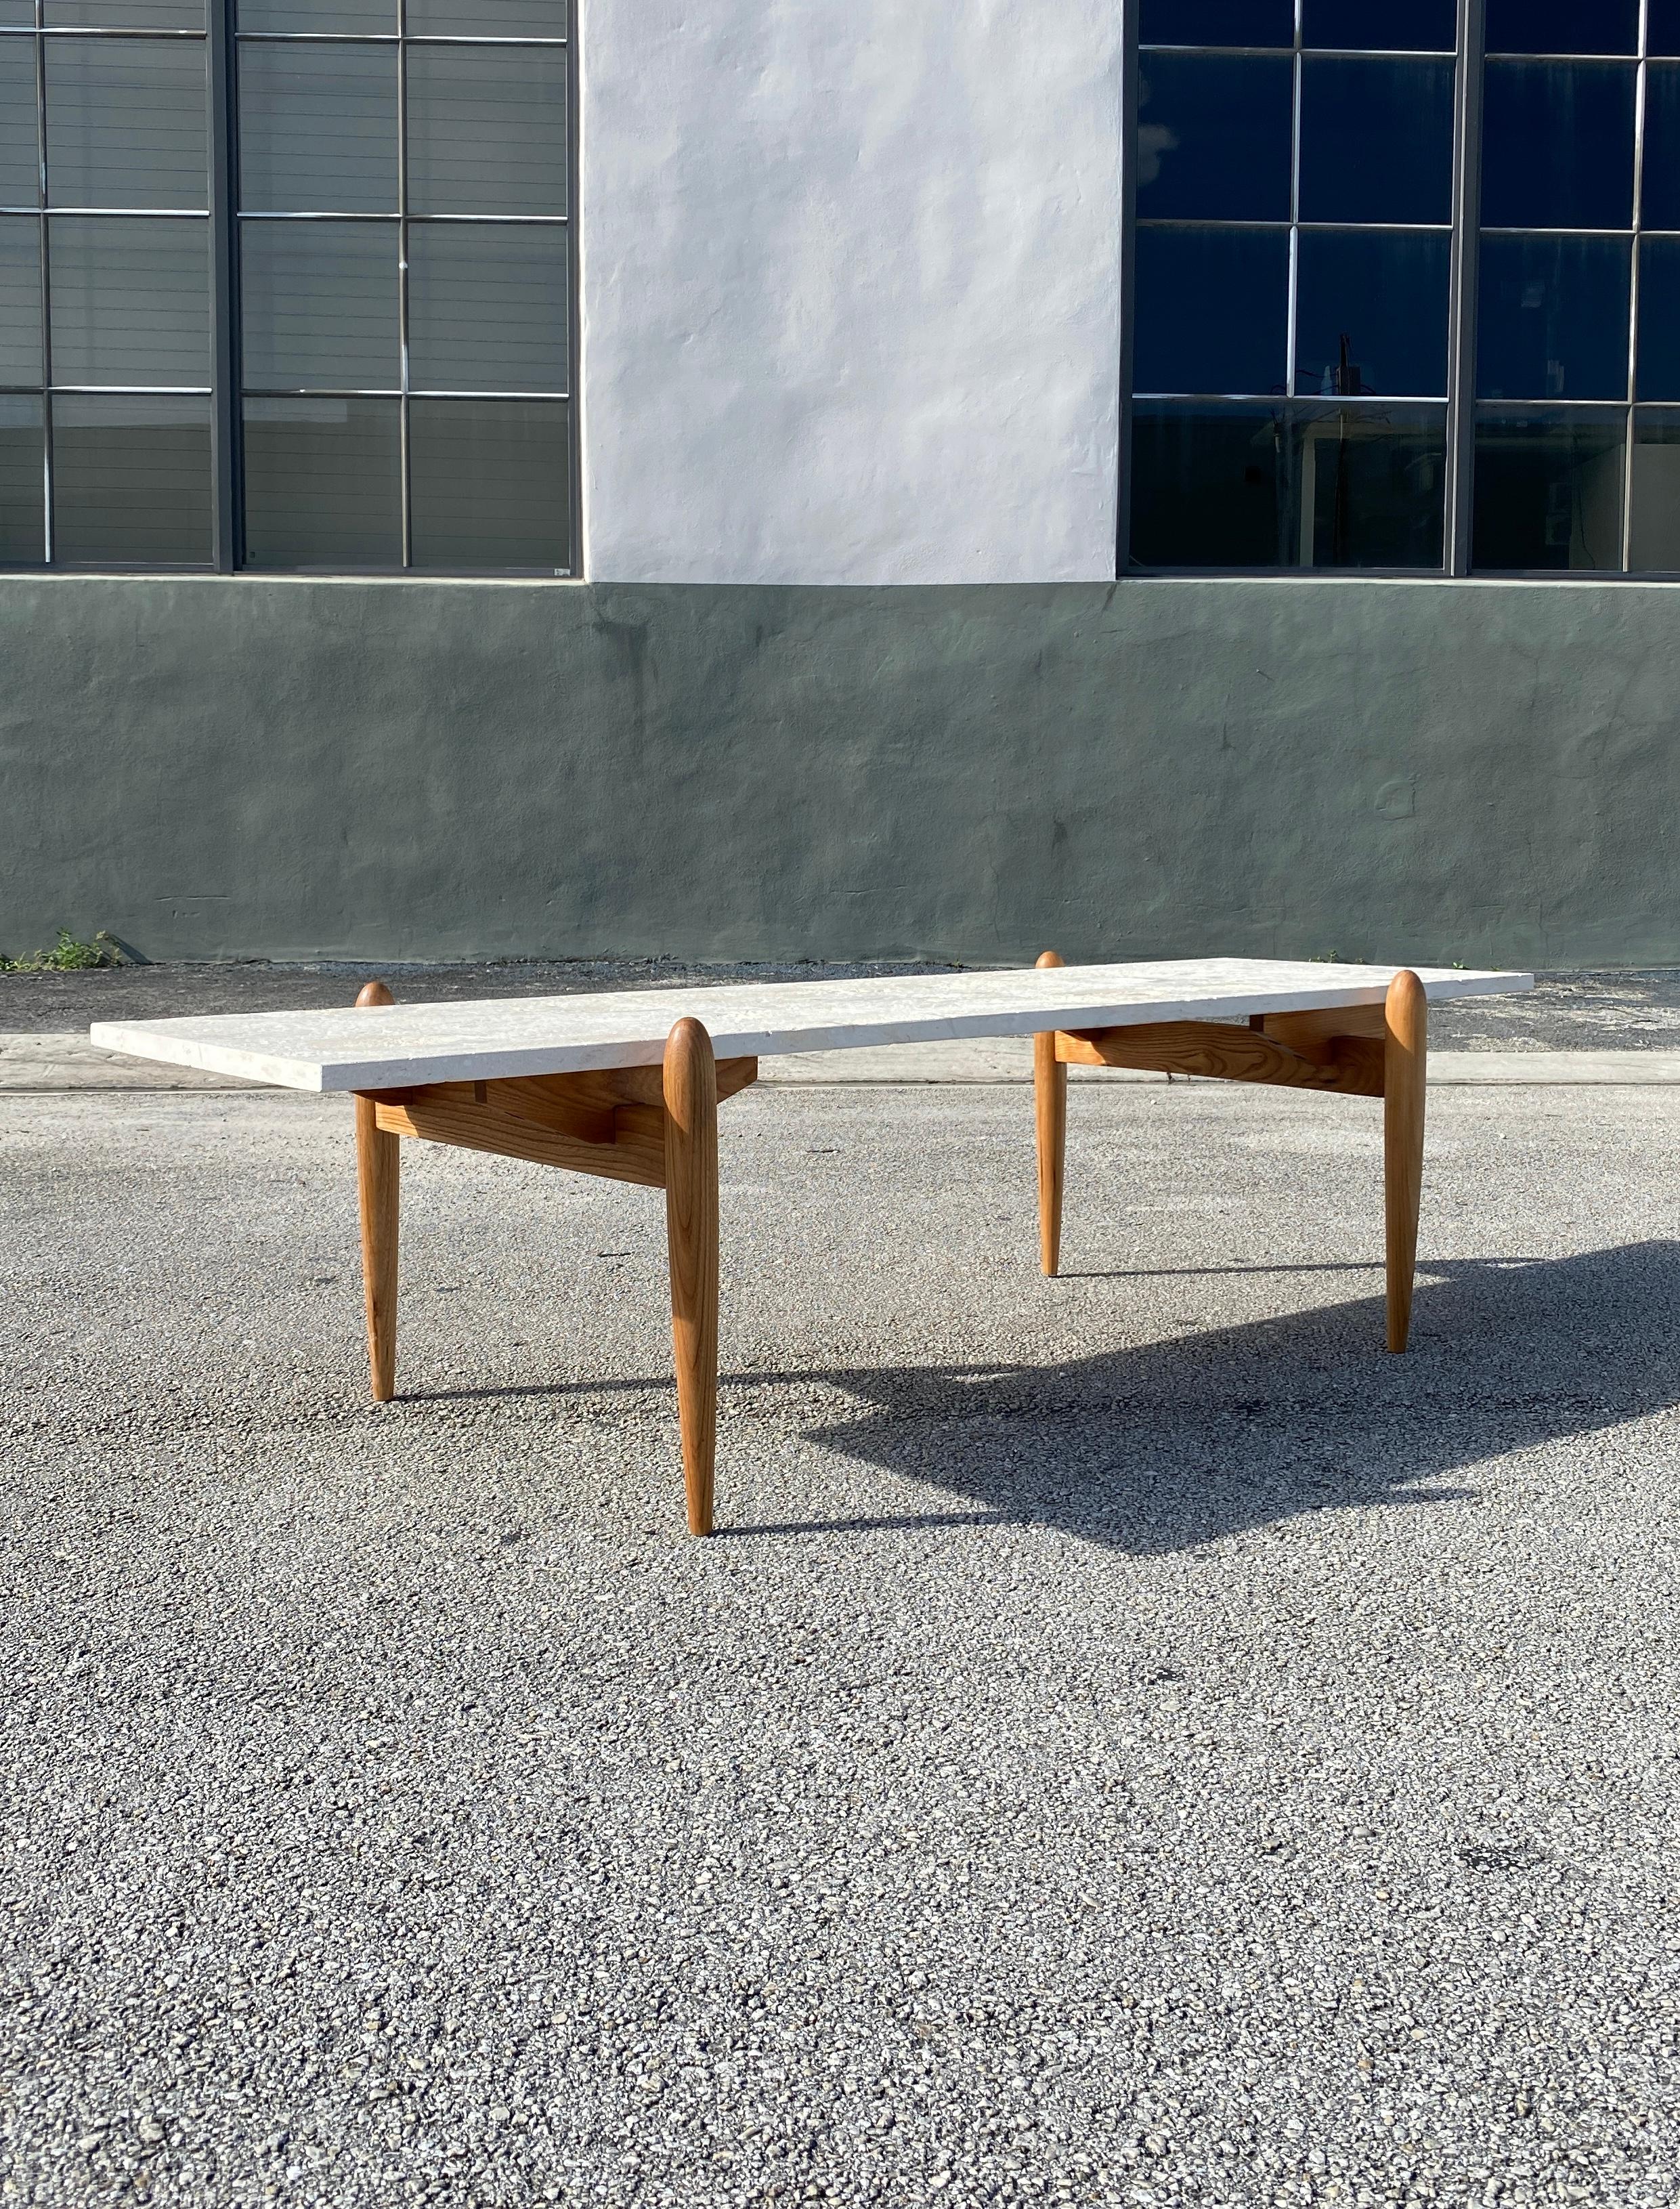 Vintage sleek coffee table made of walnut base and Travertine stone top in excellent vintage condition.

Measures: 58.5”L x 18”W x 15.5”H.

Stone 58.5”L x 17.5”W.